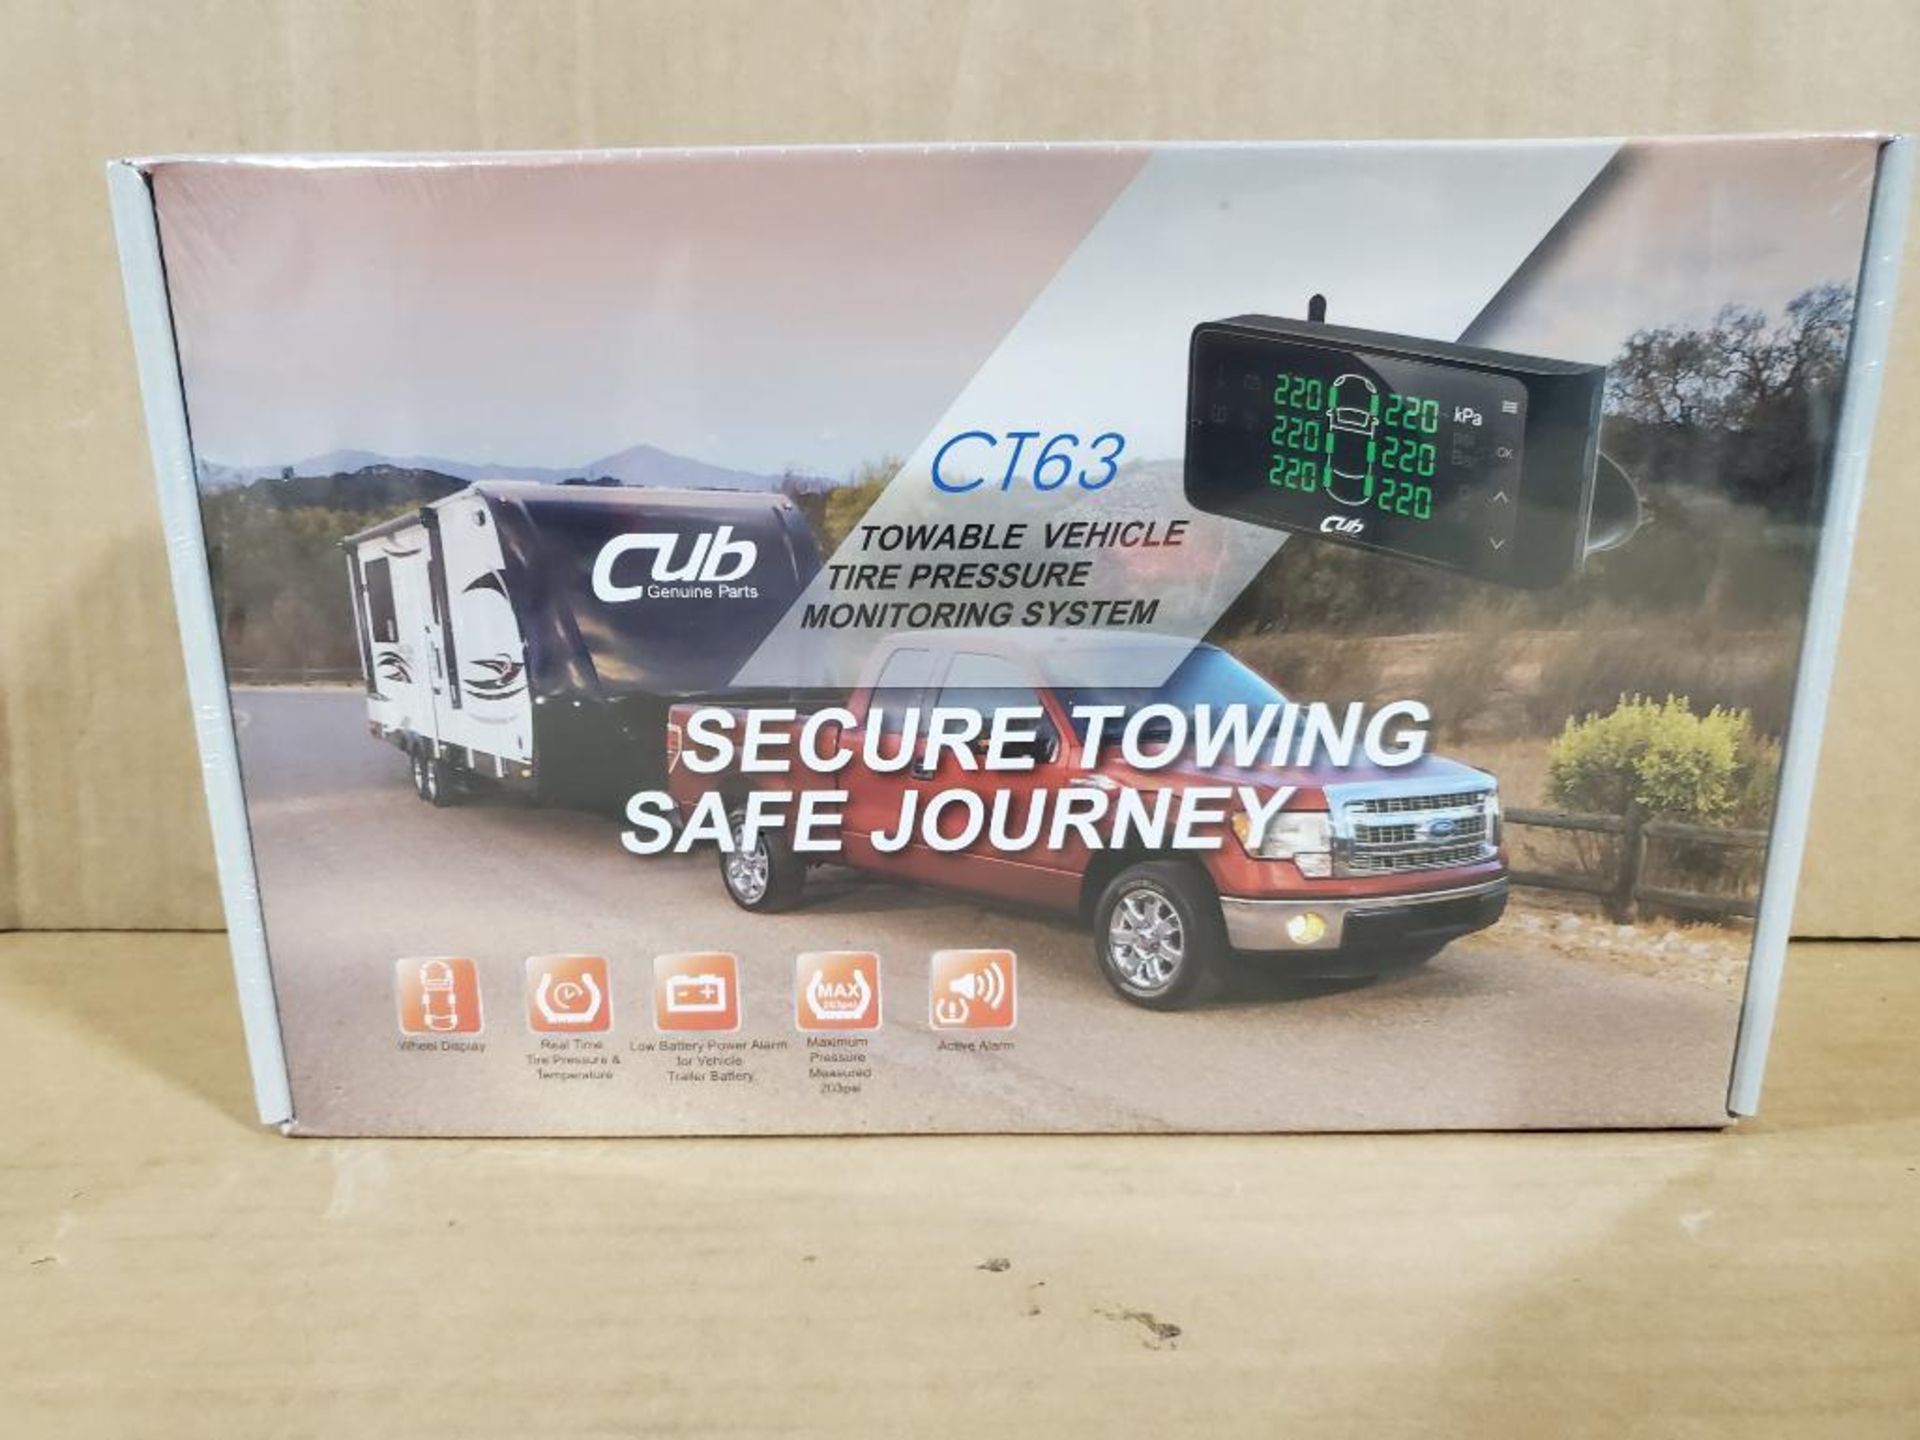 CUB towable vehicle tire pressure monitoring system. CR63.